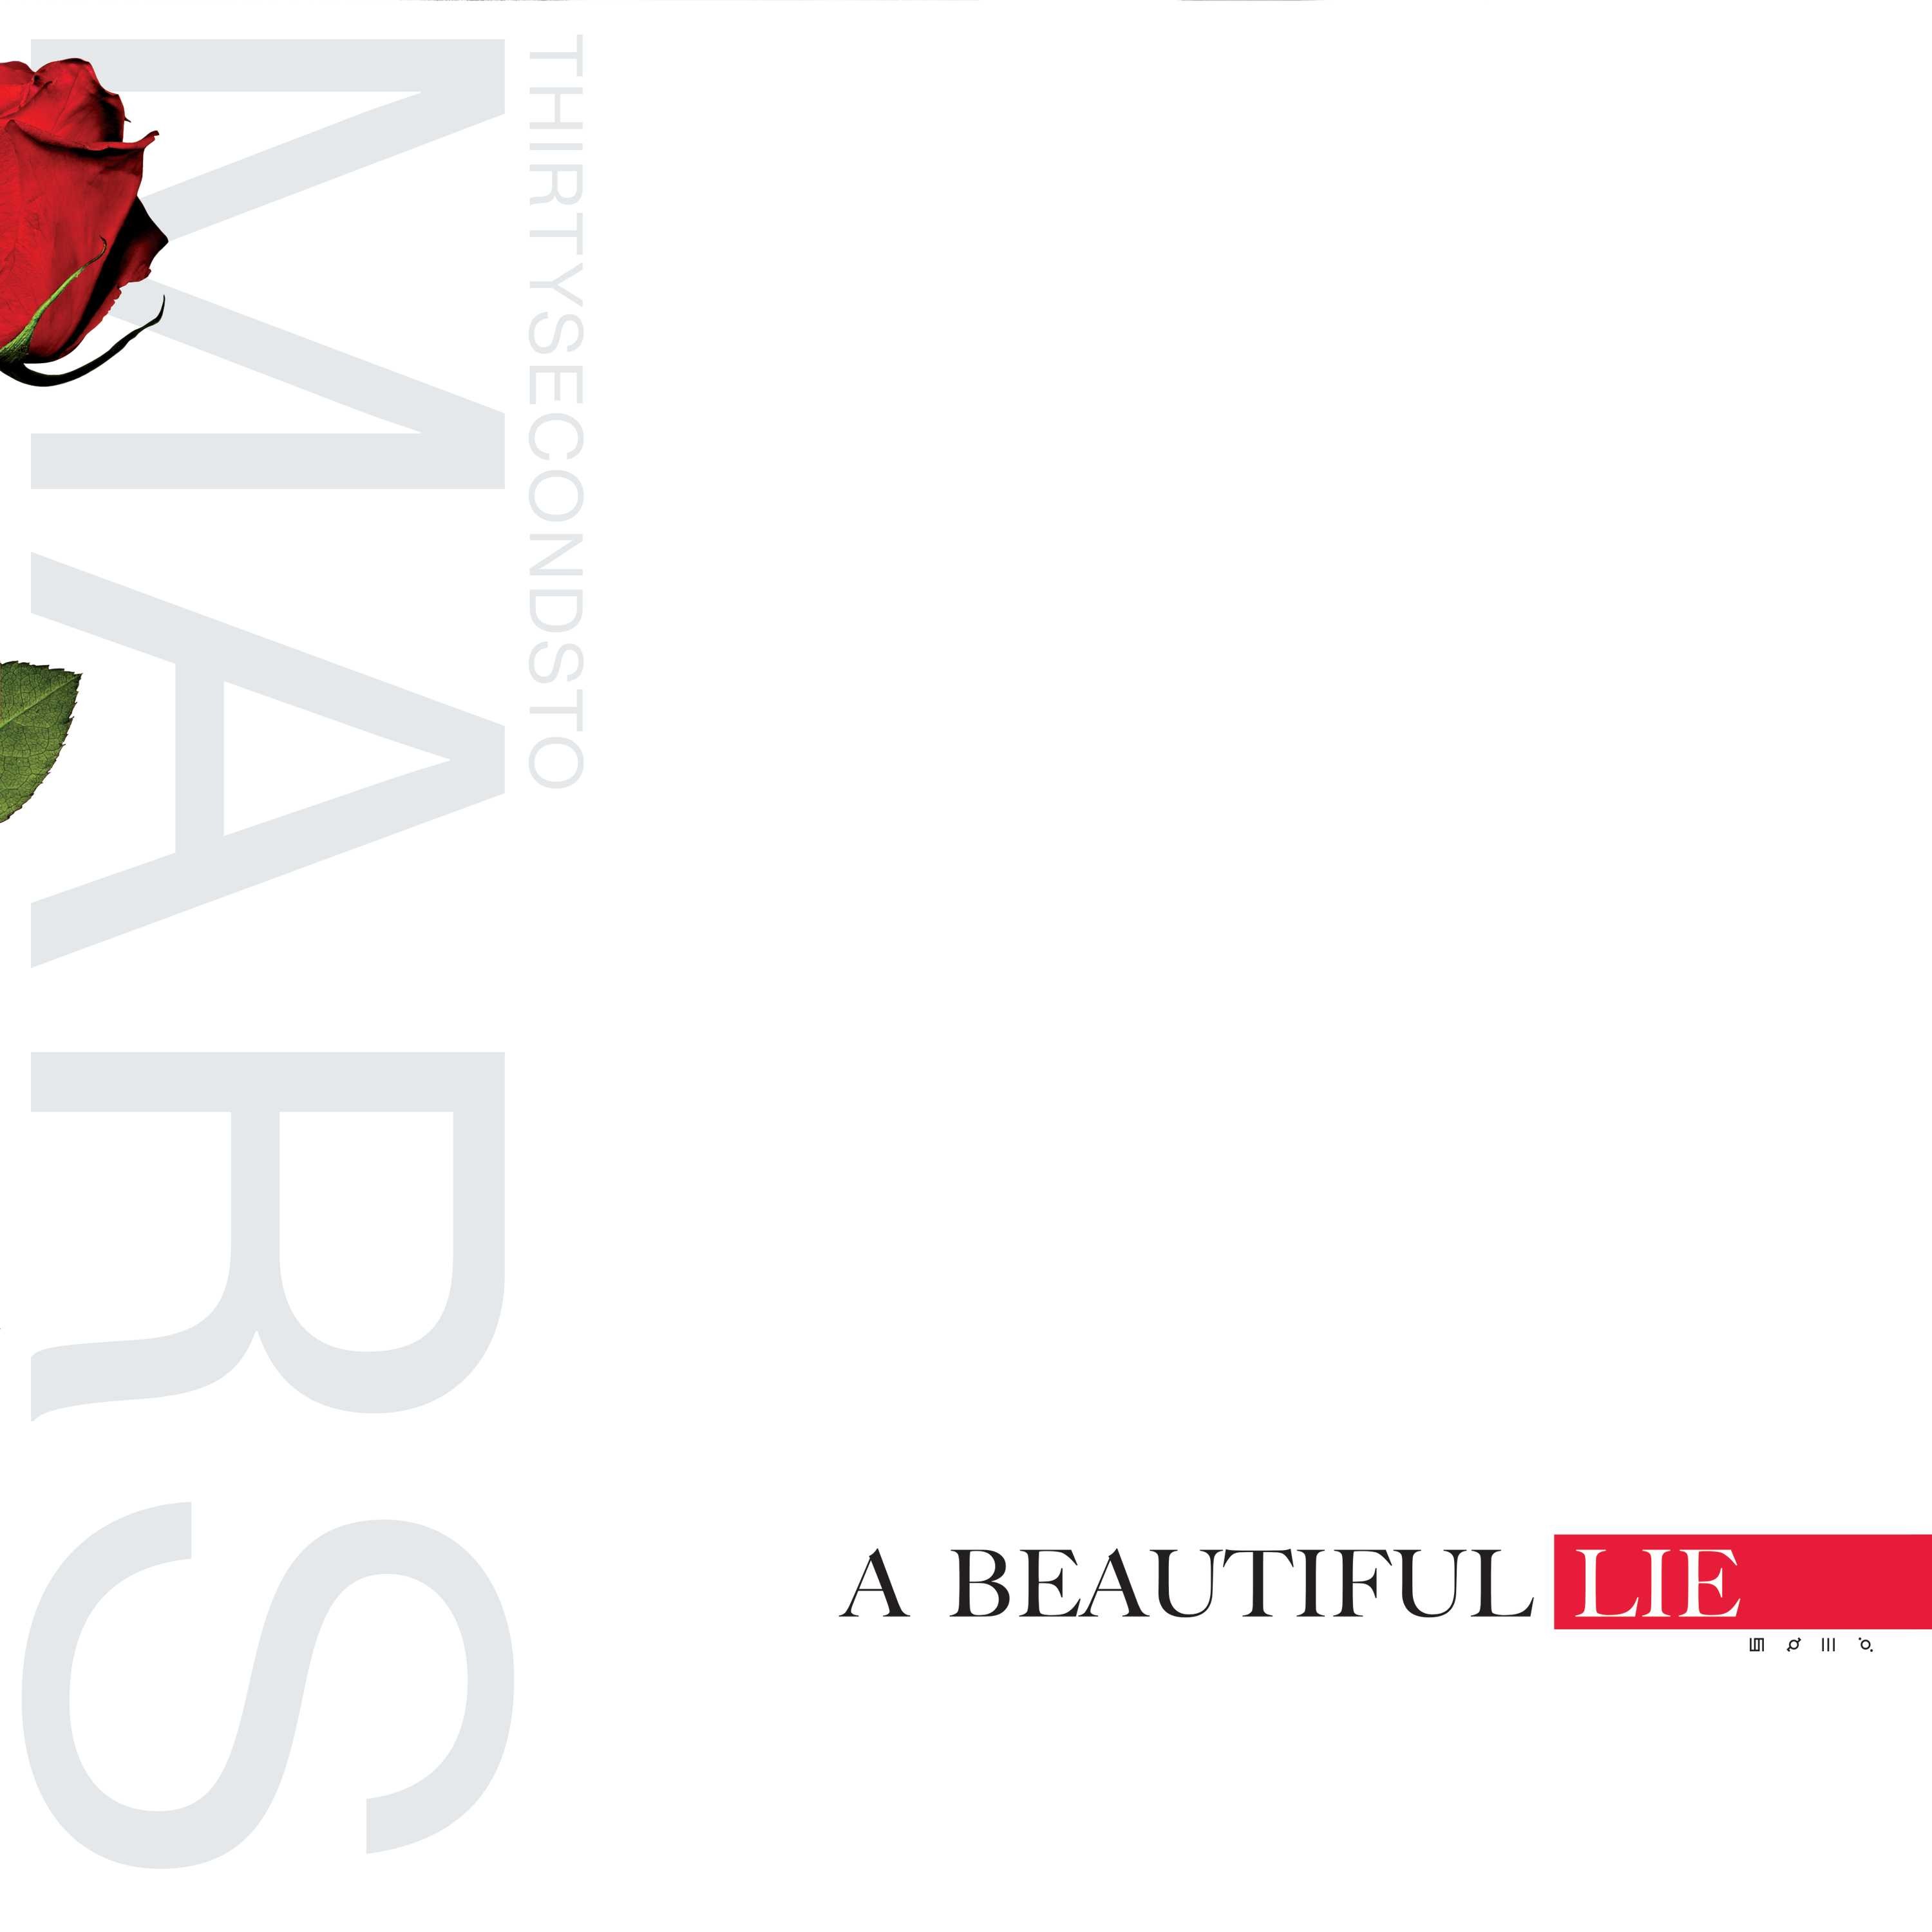 Thirty Seconds To Mars - A Beautiful Lie LP